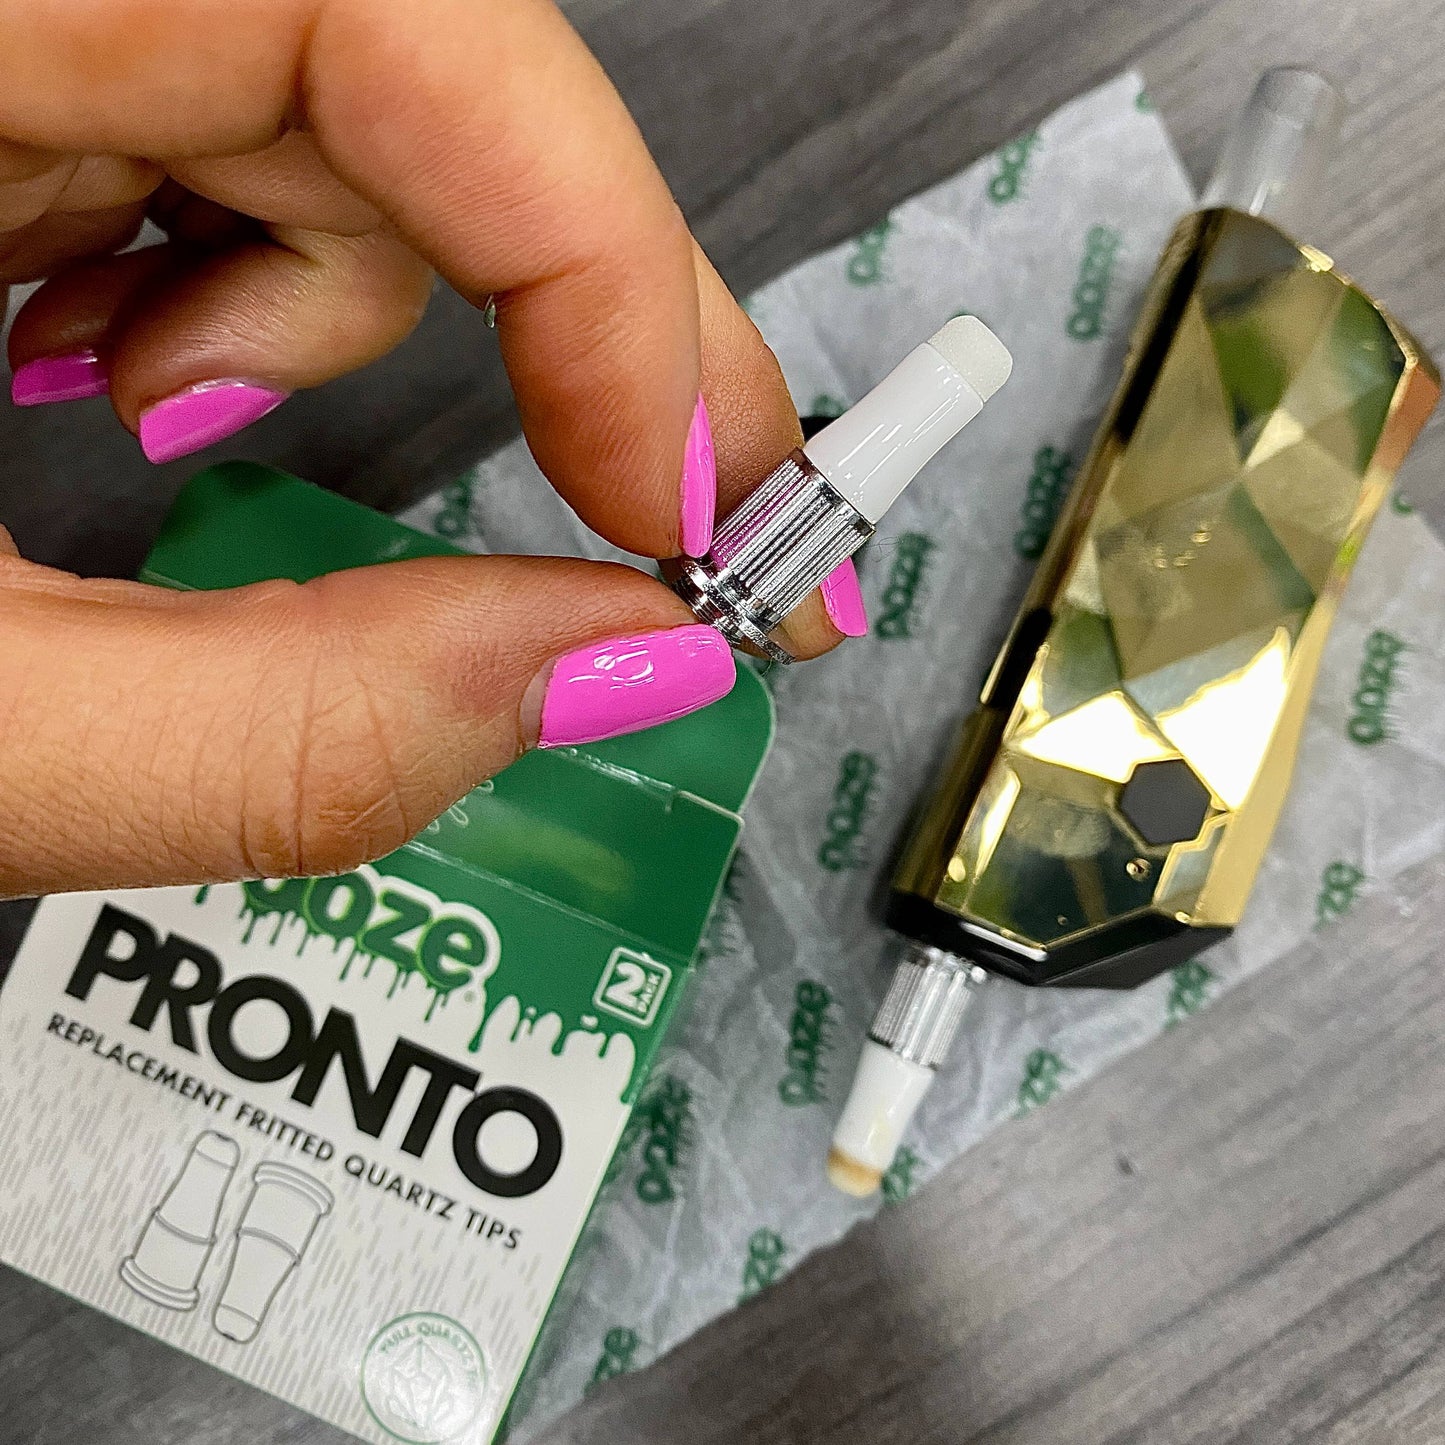 A girl with pink nails is holding a Pronto quartz replacement coil tip above a gold pronto and the coil box that are laying on a table